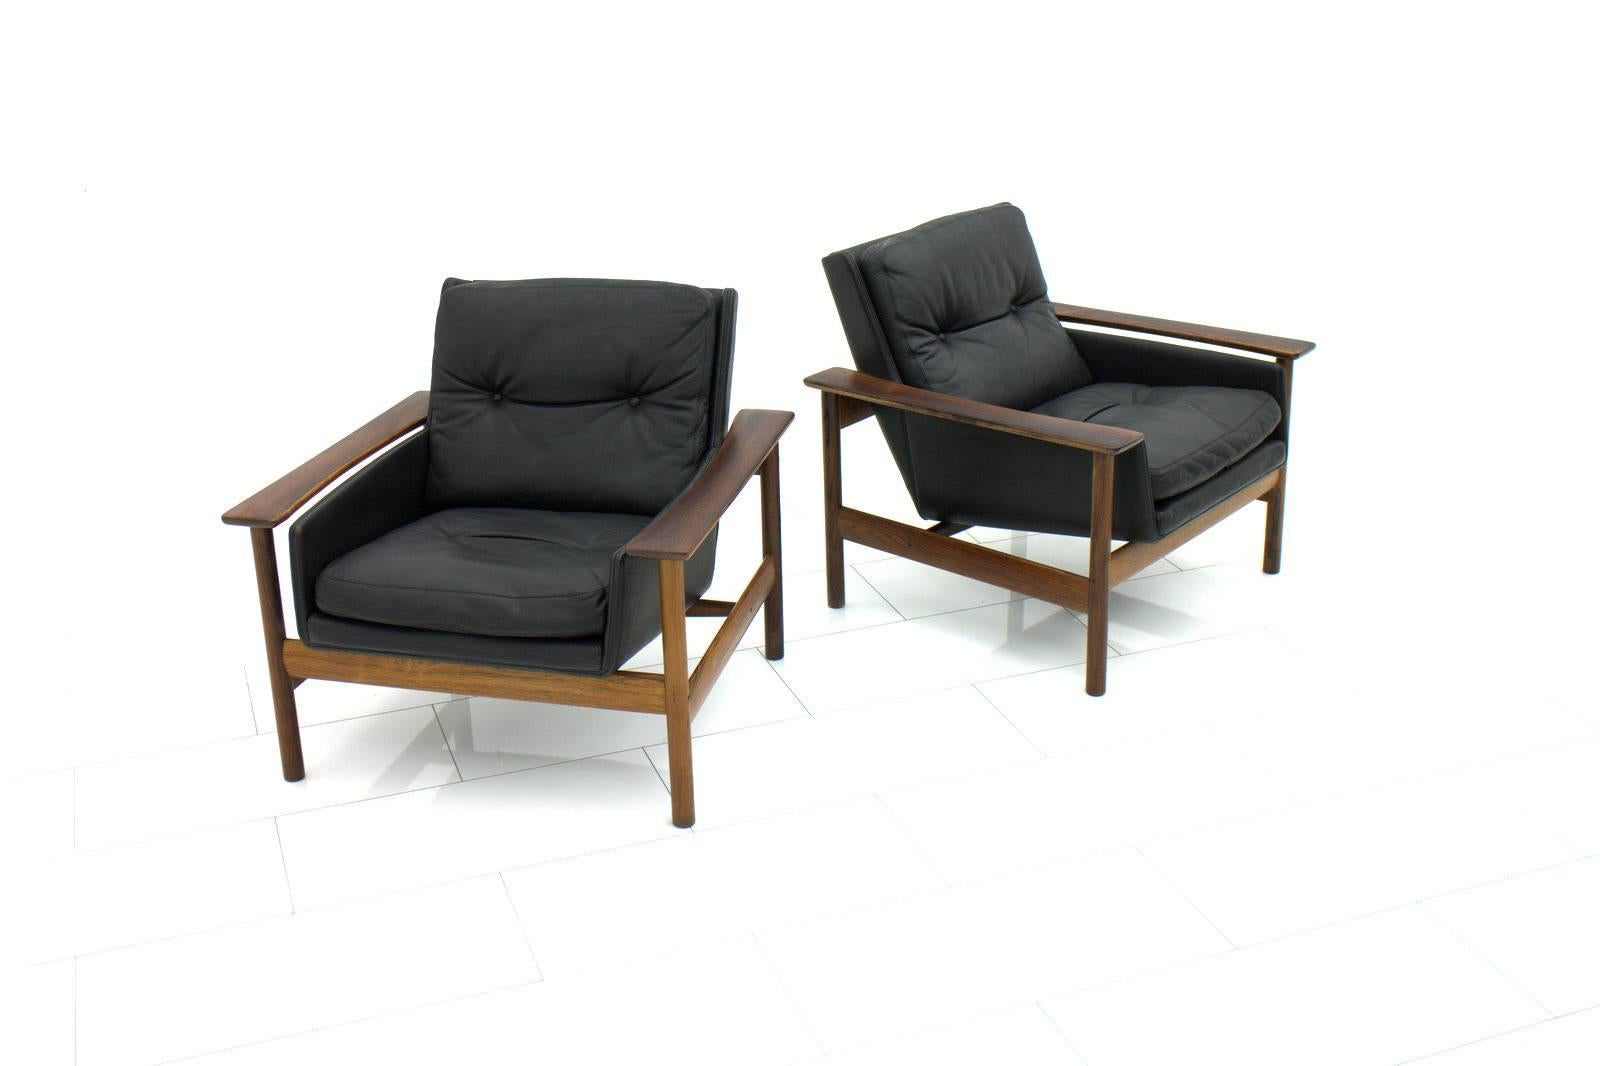 Pair of rosewood and leather lounge chairs by Sven Ivar Dysthe for Dokka, Norway, 1960s.

Very good condition.

Worldwide shipping.